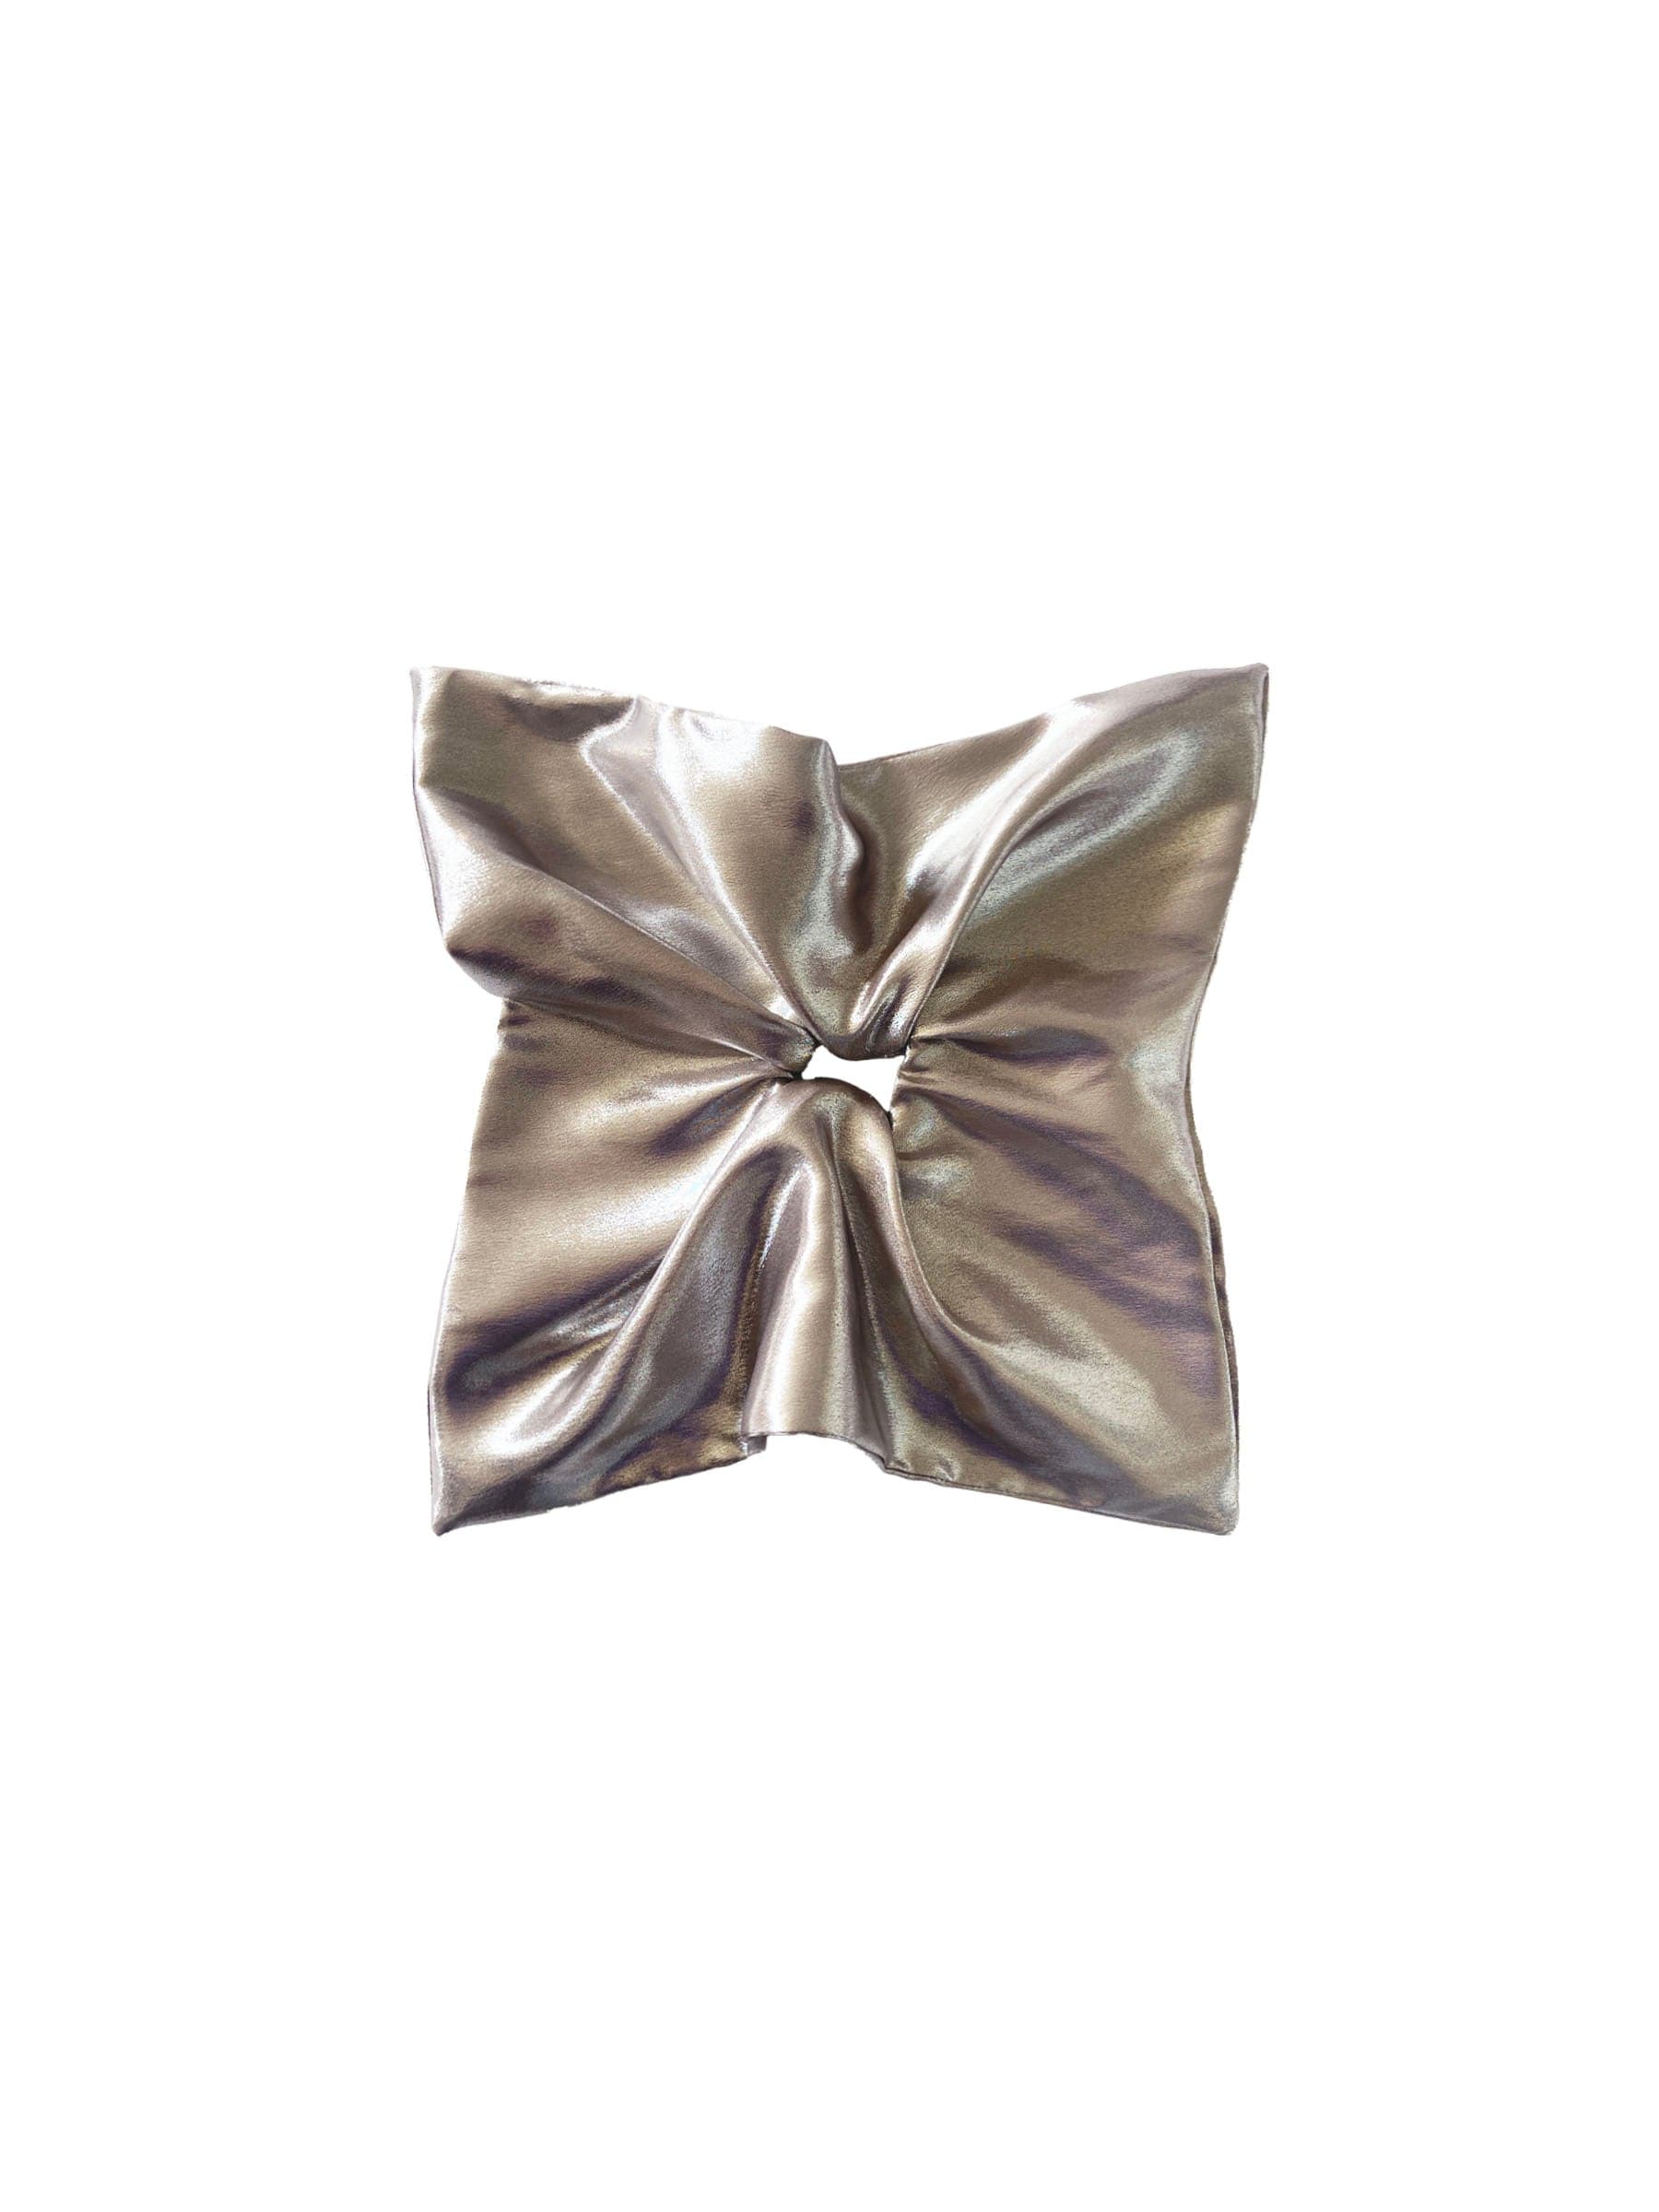 Silver_metallic_sustainable_square_hair_scrunchie_gift